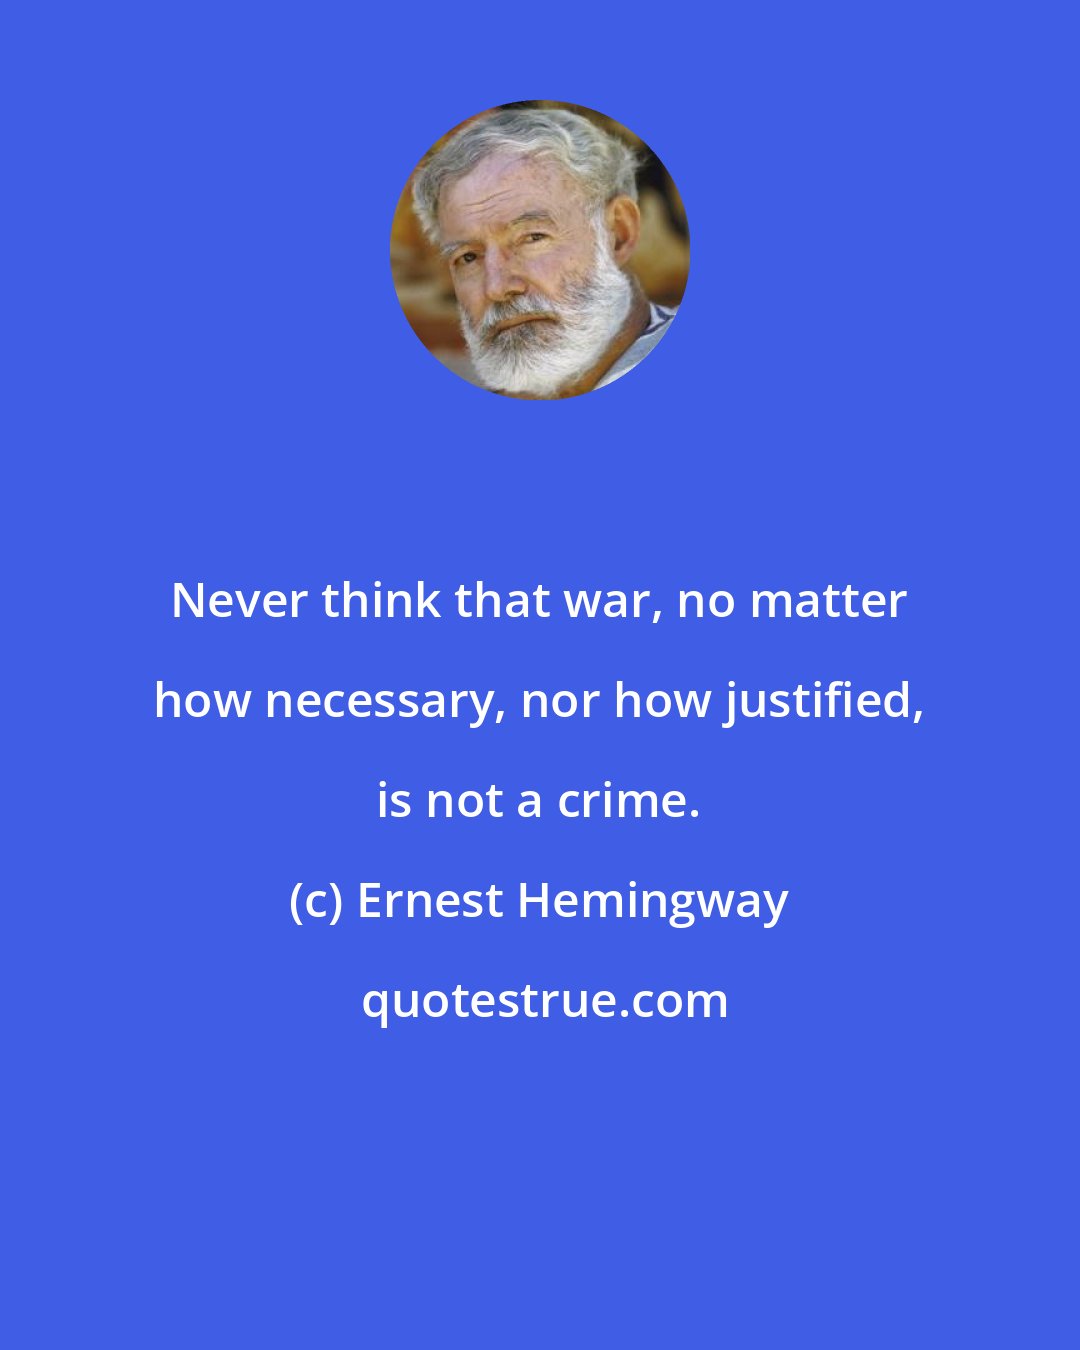 Ernest Hemingway: Never think that war, no matter how necessary, nor how justified, is not a crime.